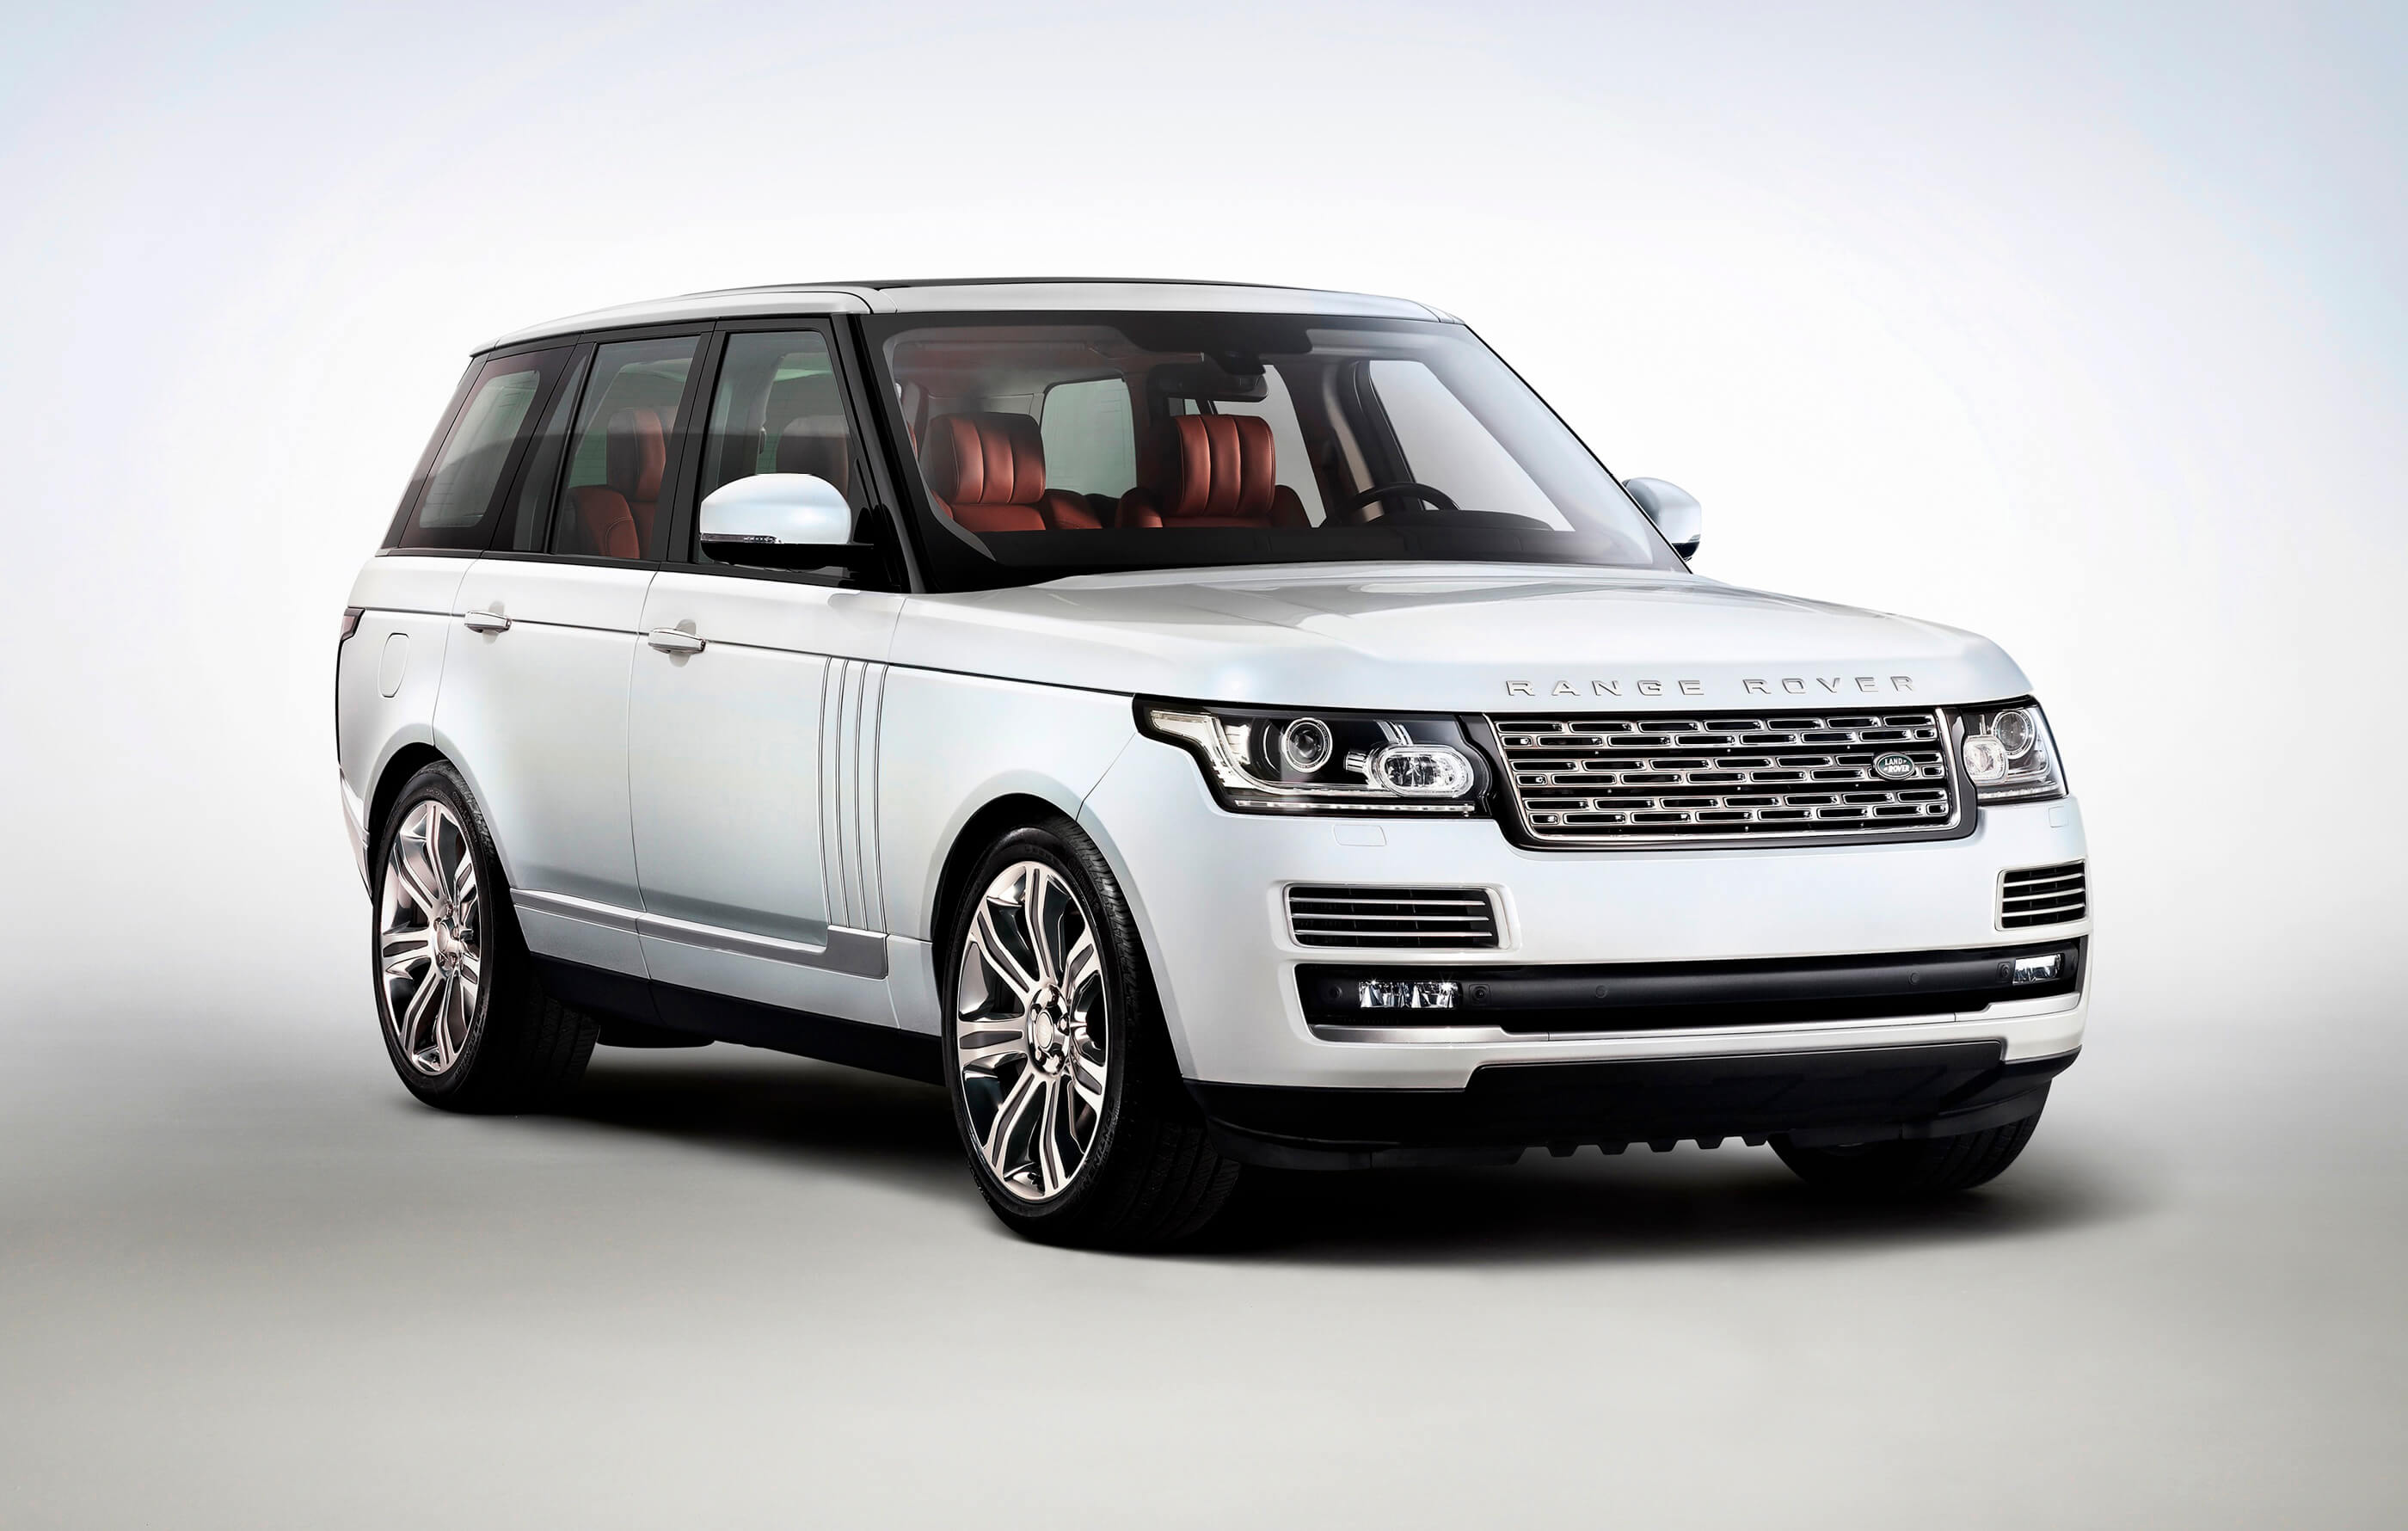 Full screen image of a white Land Rover Range Rover, with red leather interior on a white and grey background